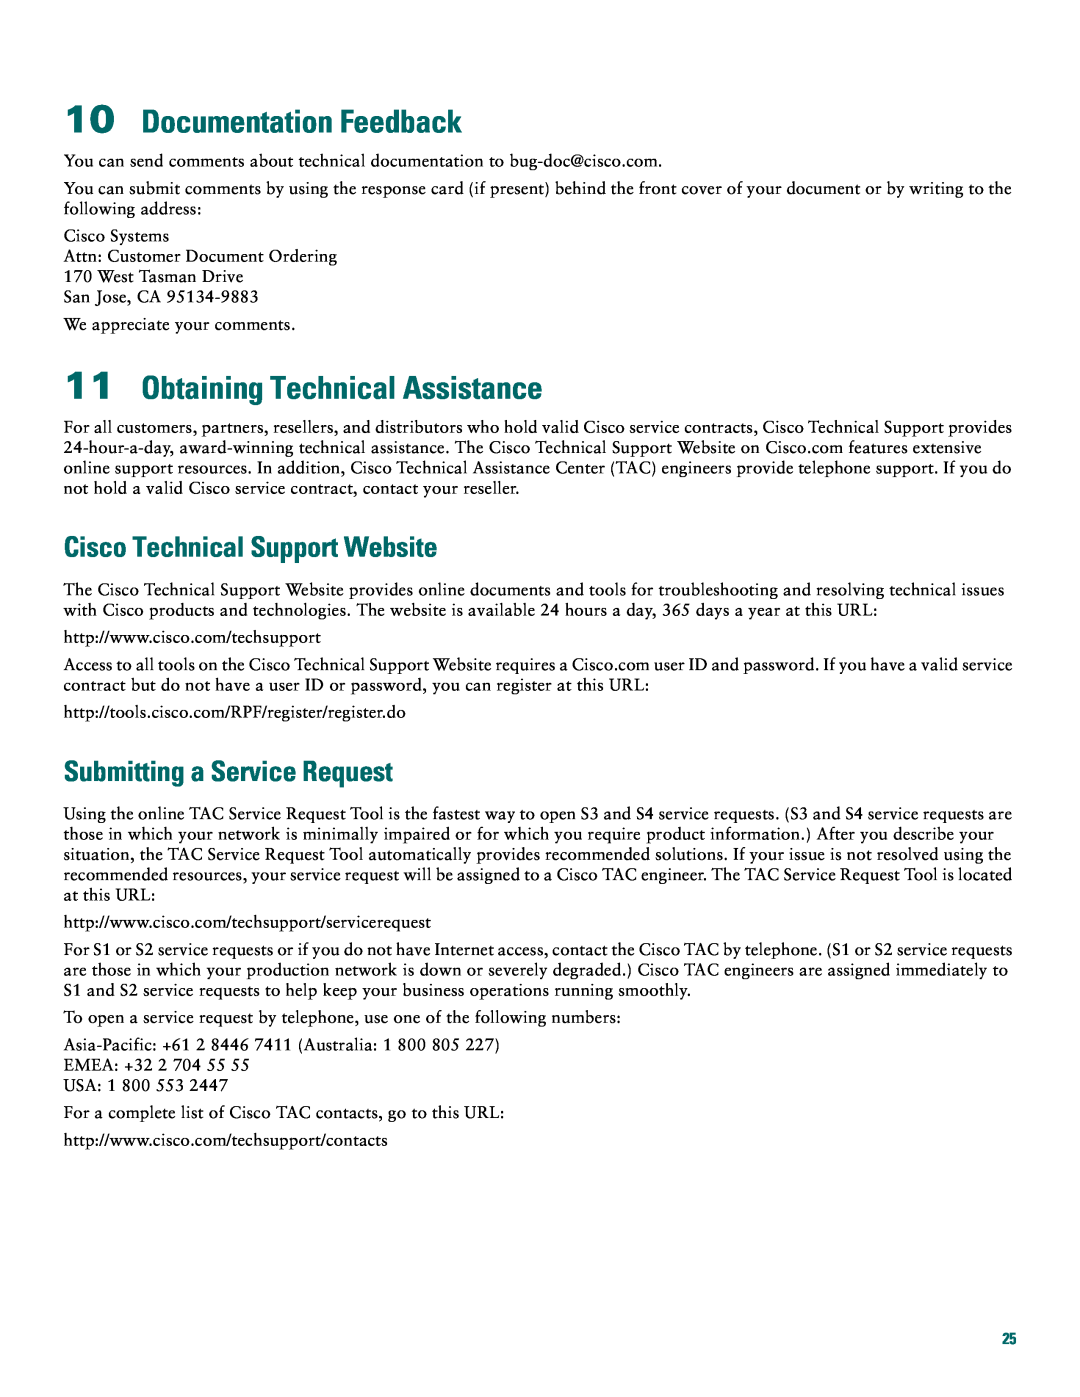 Cisco Systems 2691 quick start Documentation Feedback, Obtaining Technical Assistance, Cisco Technical Support Website 